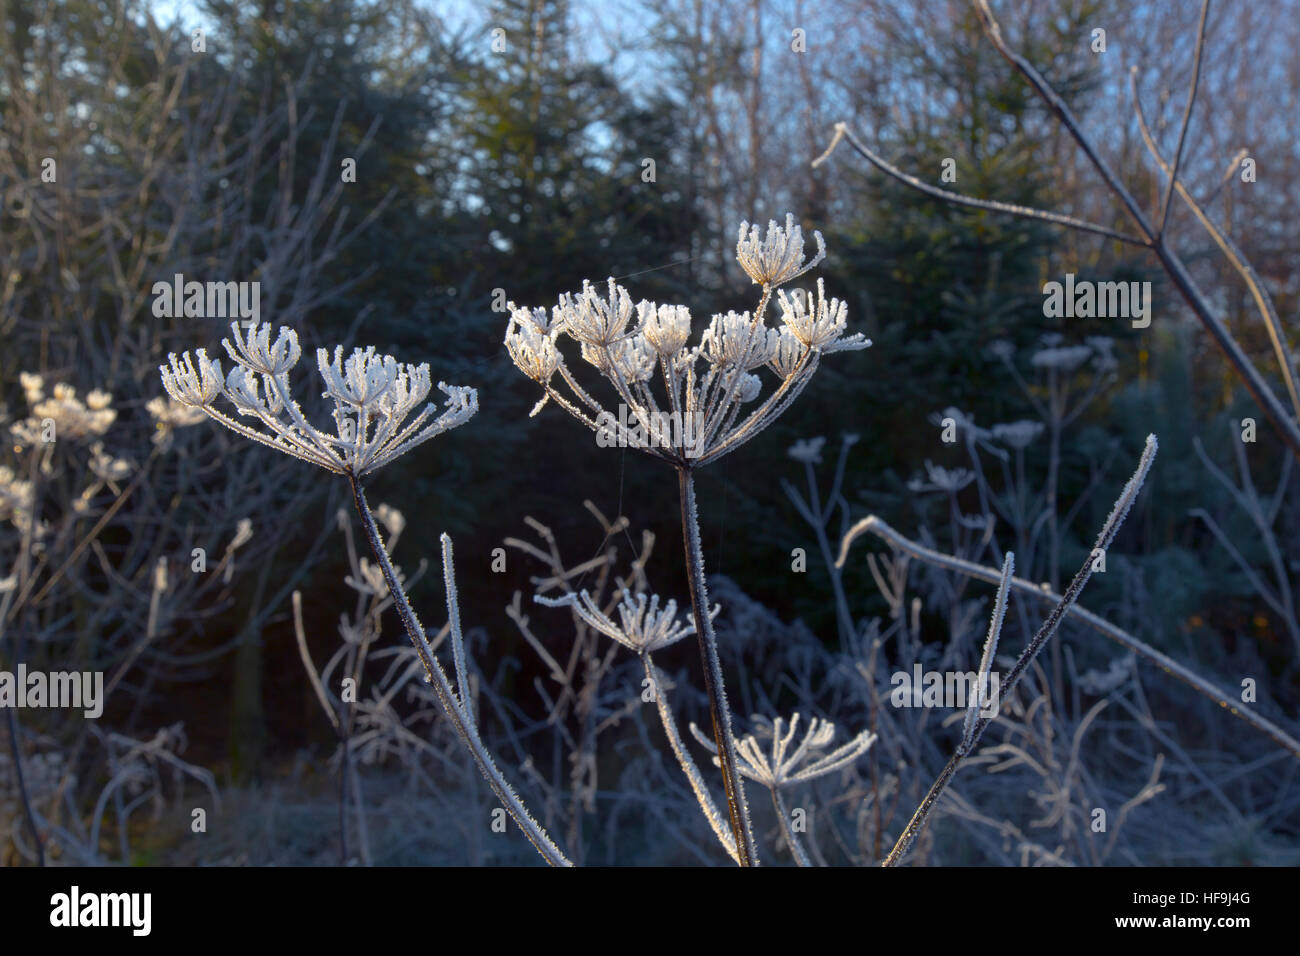 Hedge Parsley Torilis japonica frosted in an early winter's day Stock Photo